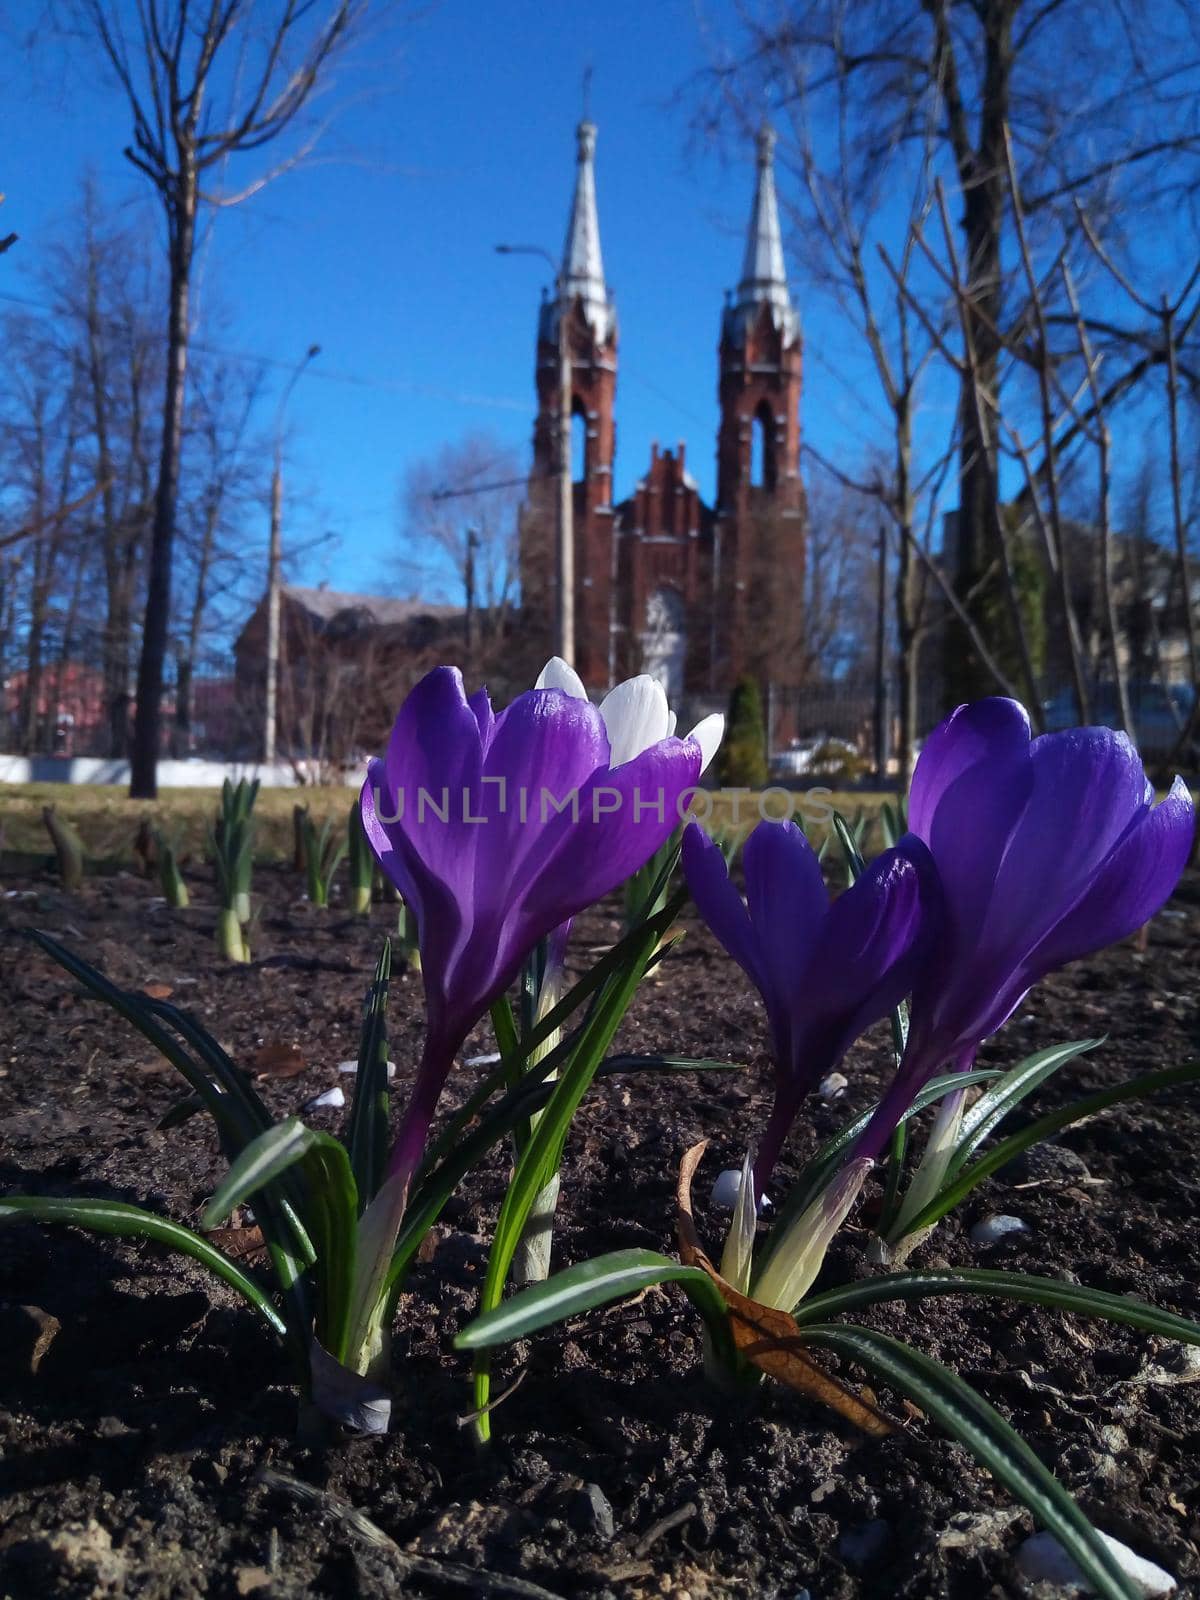 Crocuses blooming in the park against the background of the Church of the Sacred Heart of Jesus. Rybinsk,Russia.